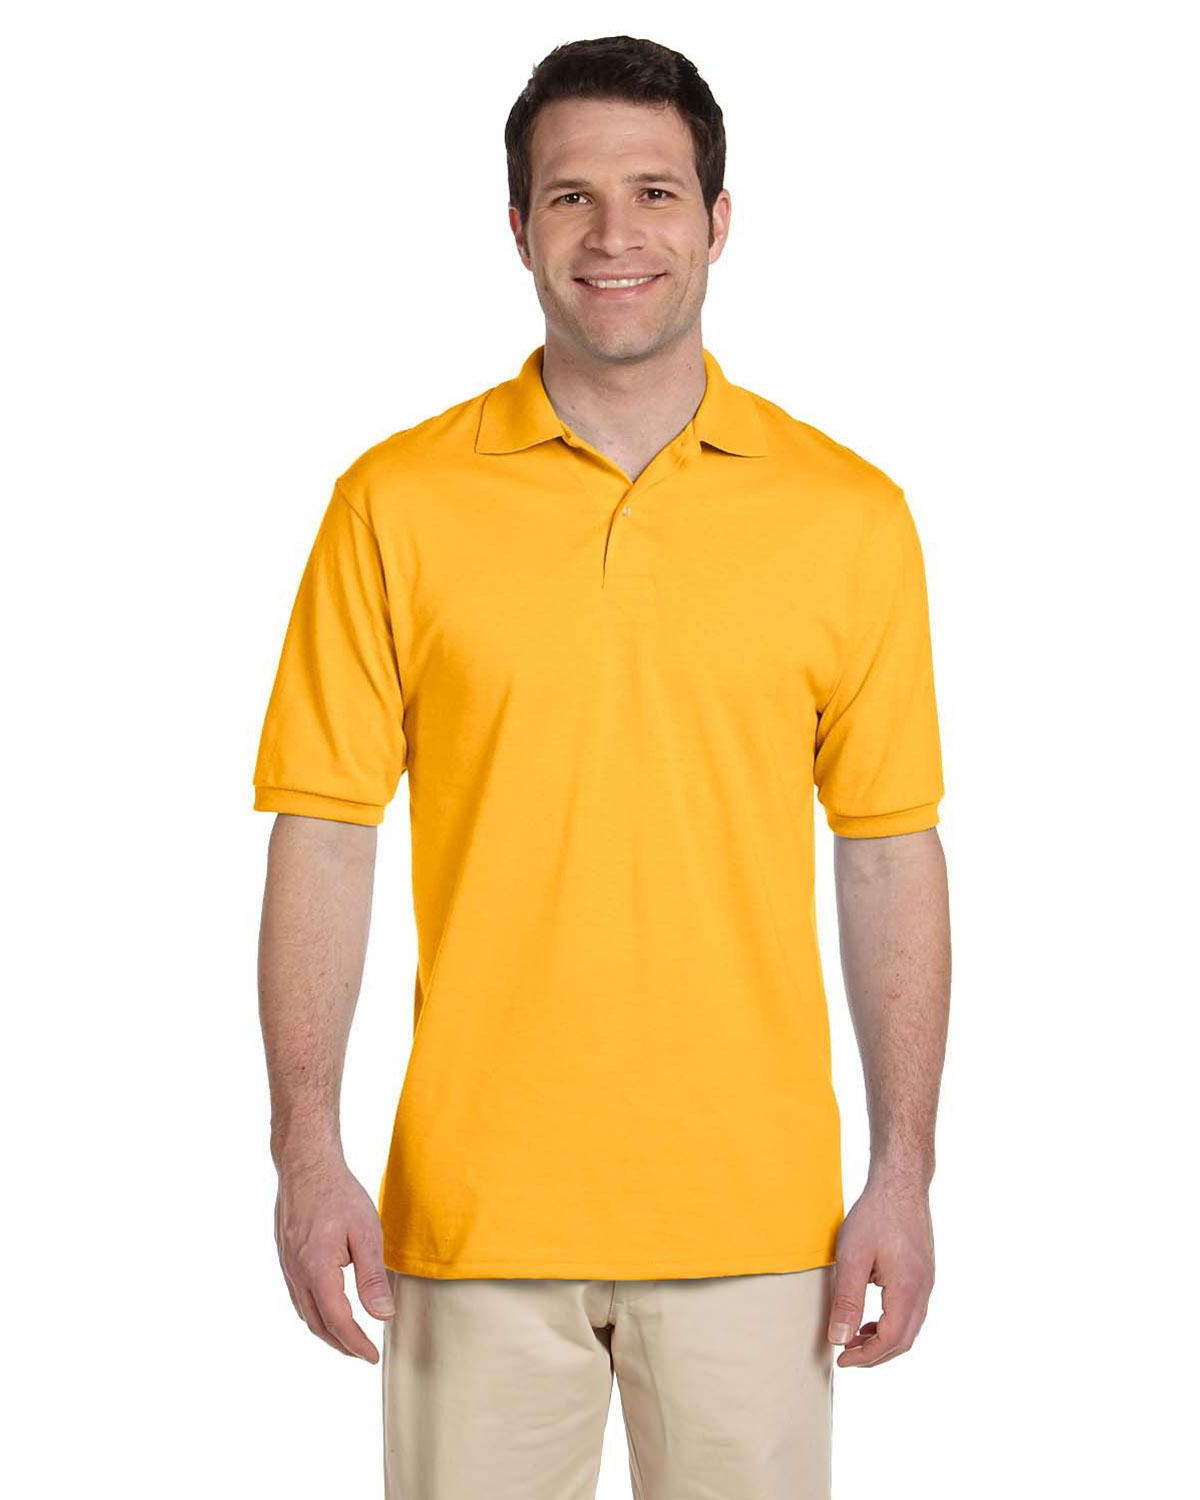 Jerzees 437 Men 5.6 Oz 50/50 Jersey Polo With Spotshield at Apparelstation